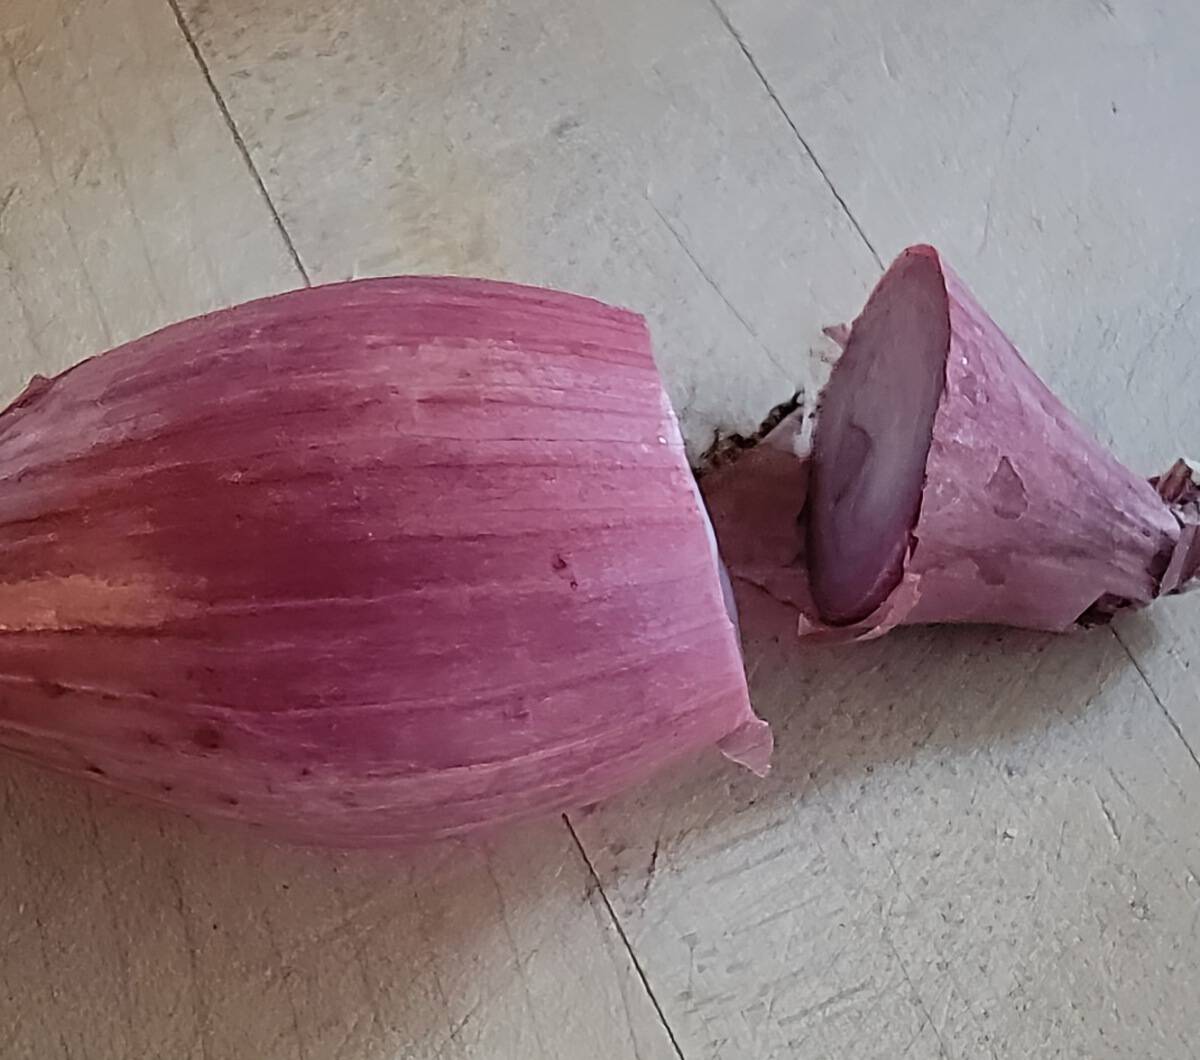 unpeeled shallot with stem end cut off.